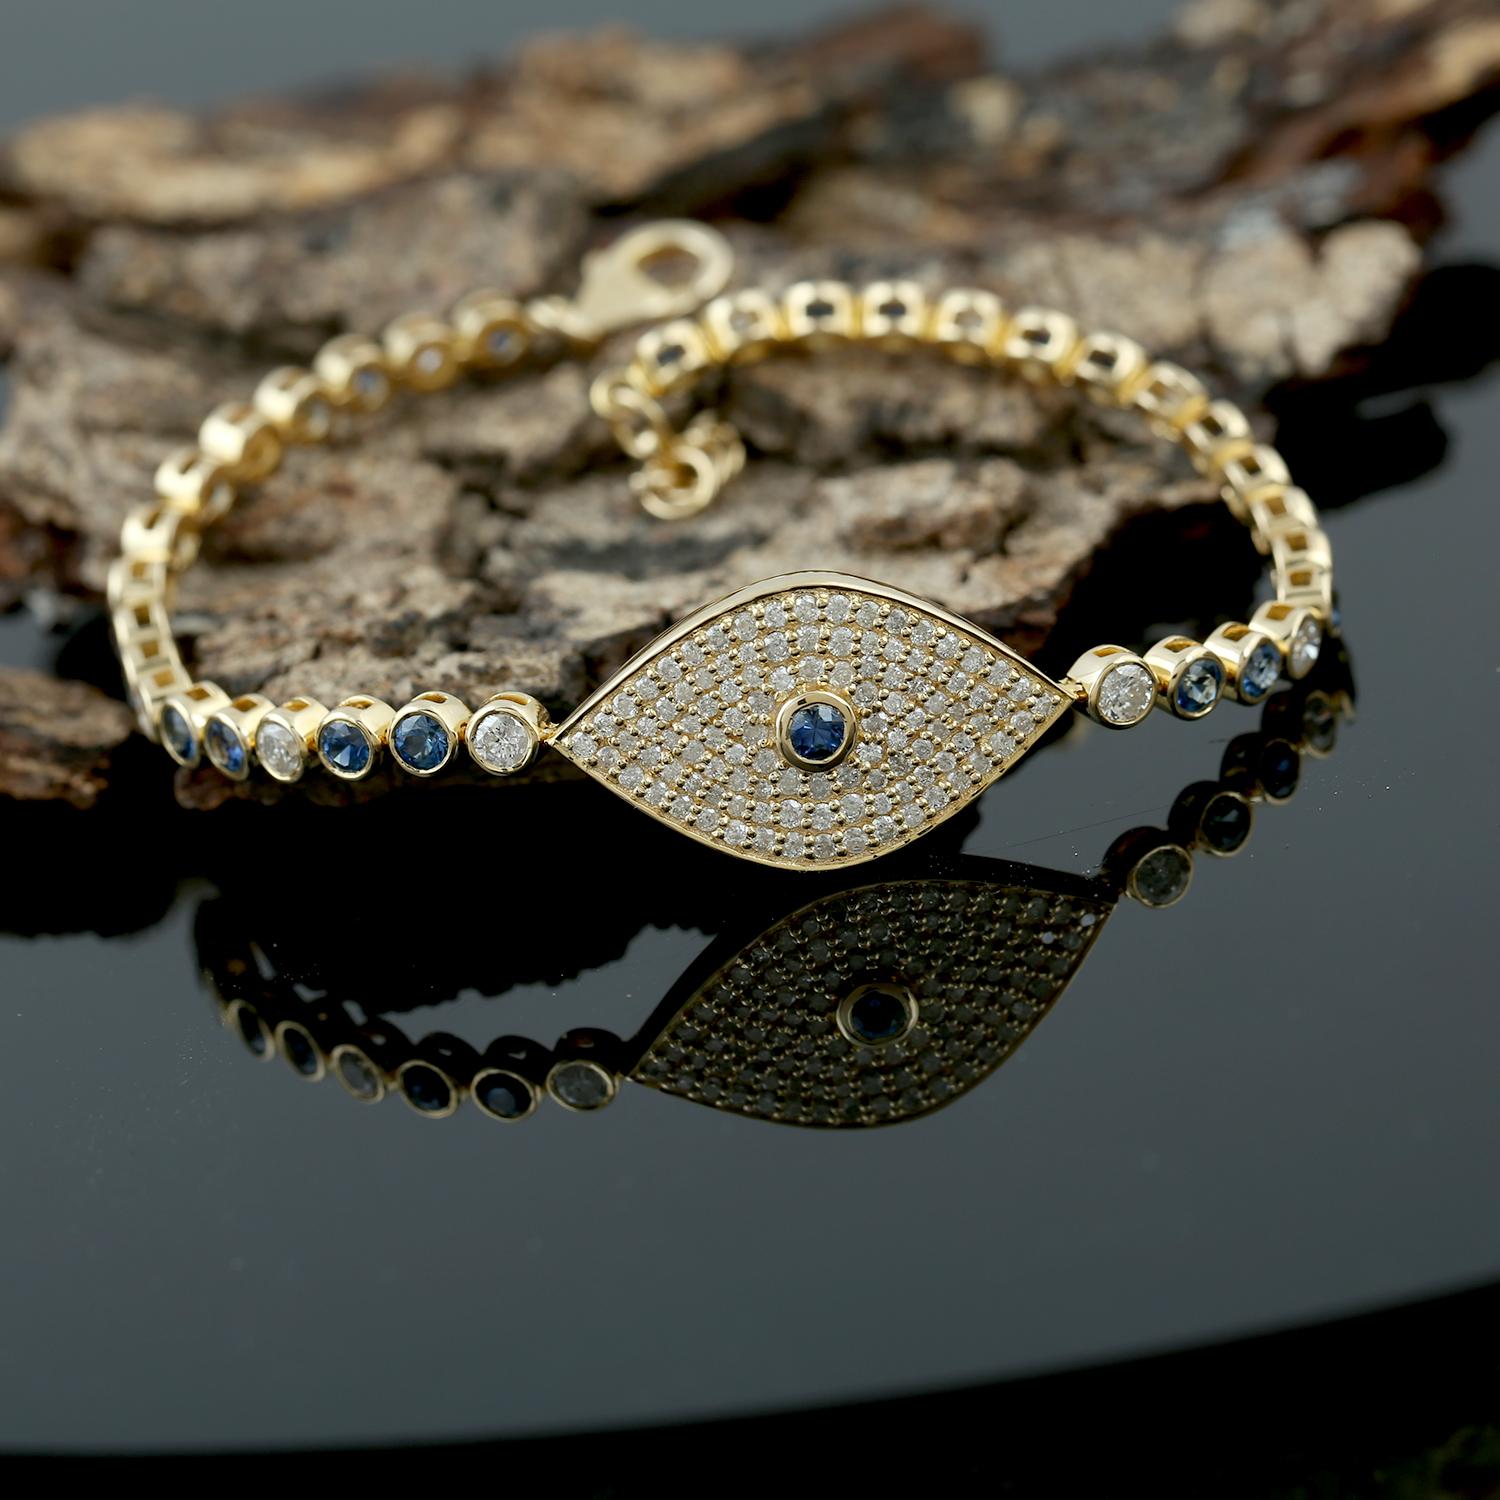 A beautiful bracelet handmade in 14K gold & set in 2.65 carats blue sapphire and 1.92 carats of sparkling diamonds. 

FOLLOW MEGHNA JEWELS storefront to view the latest collection & exclusive pieces. Meghna Jewels is proudly rated as a Top Seller on